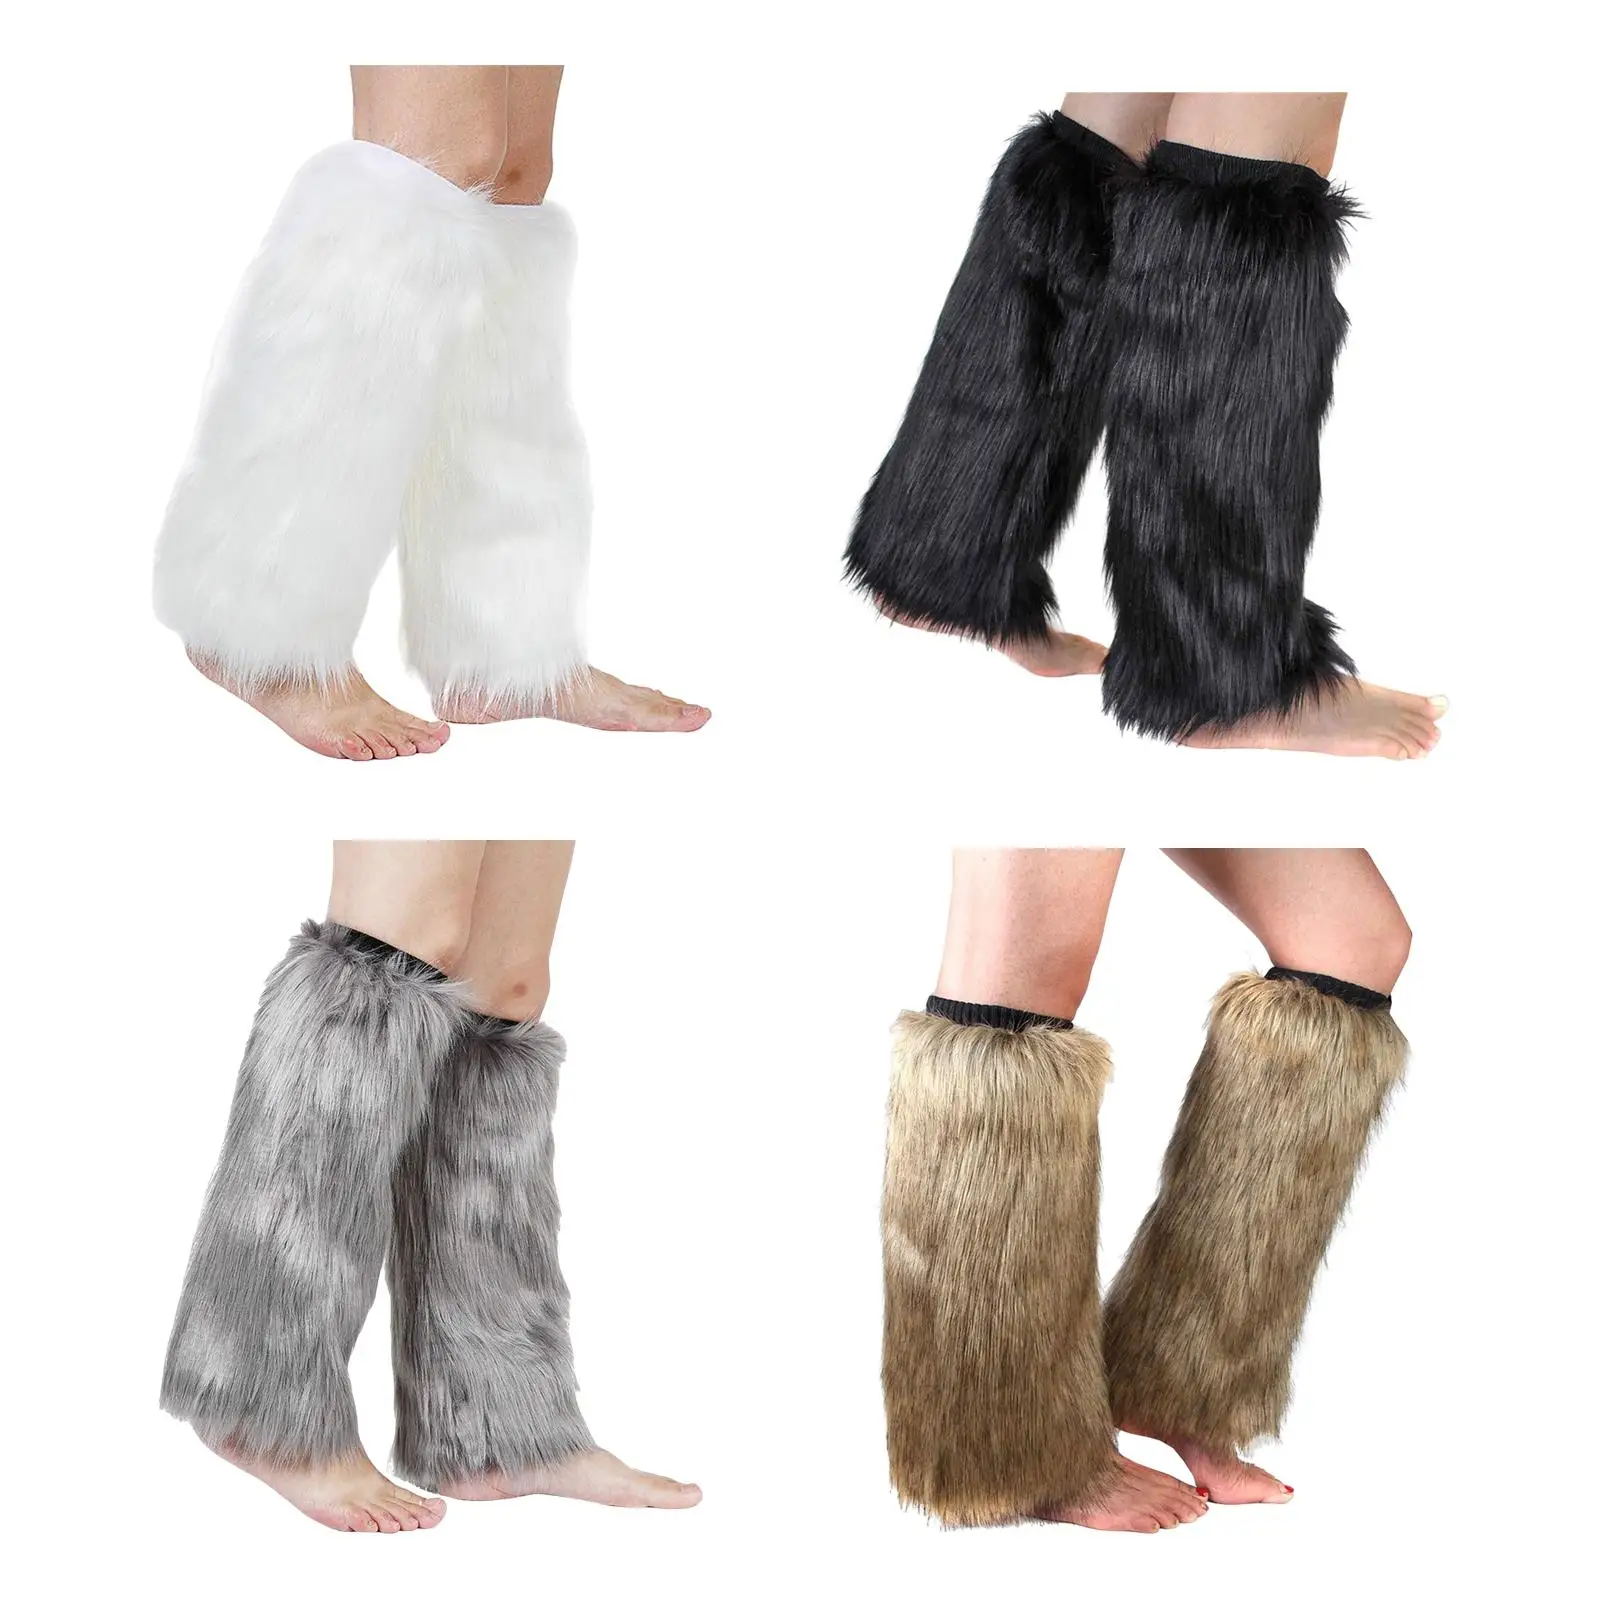 Leg Warmers Eskimo Party Costumes Stockings Boot Covers Boots Cuff Cover for Adult Long Boots Heels Cosplay Costume Party